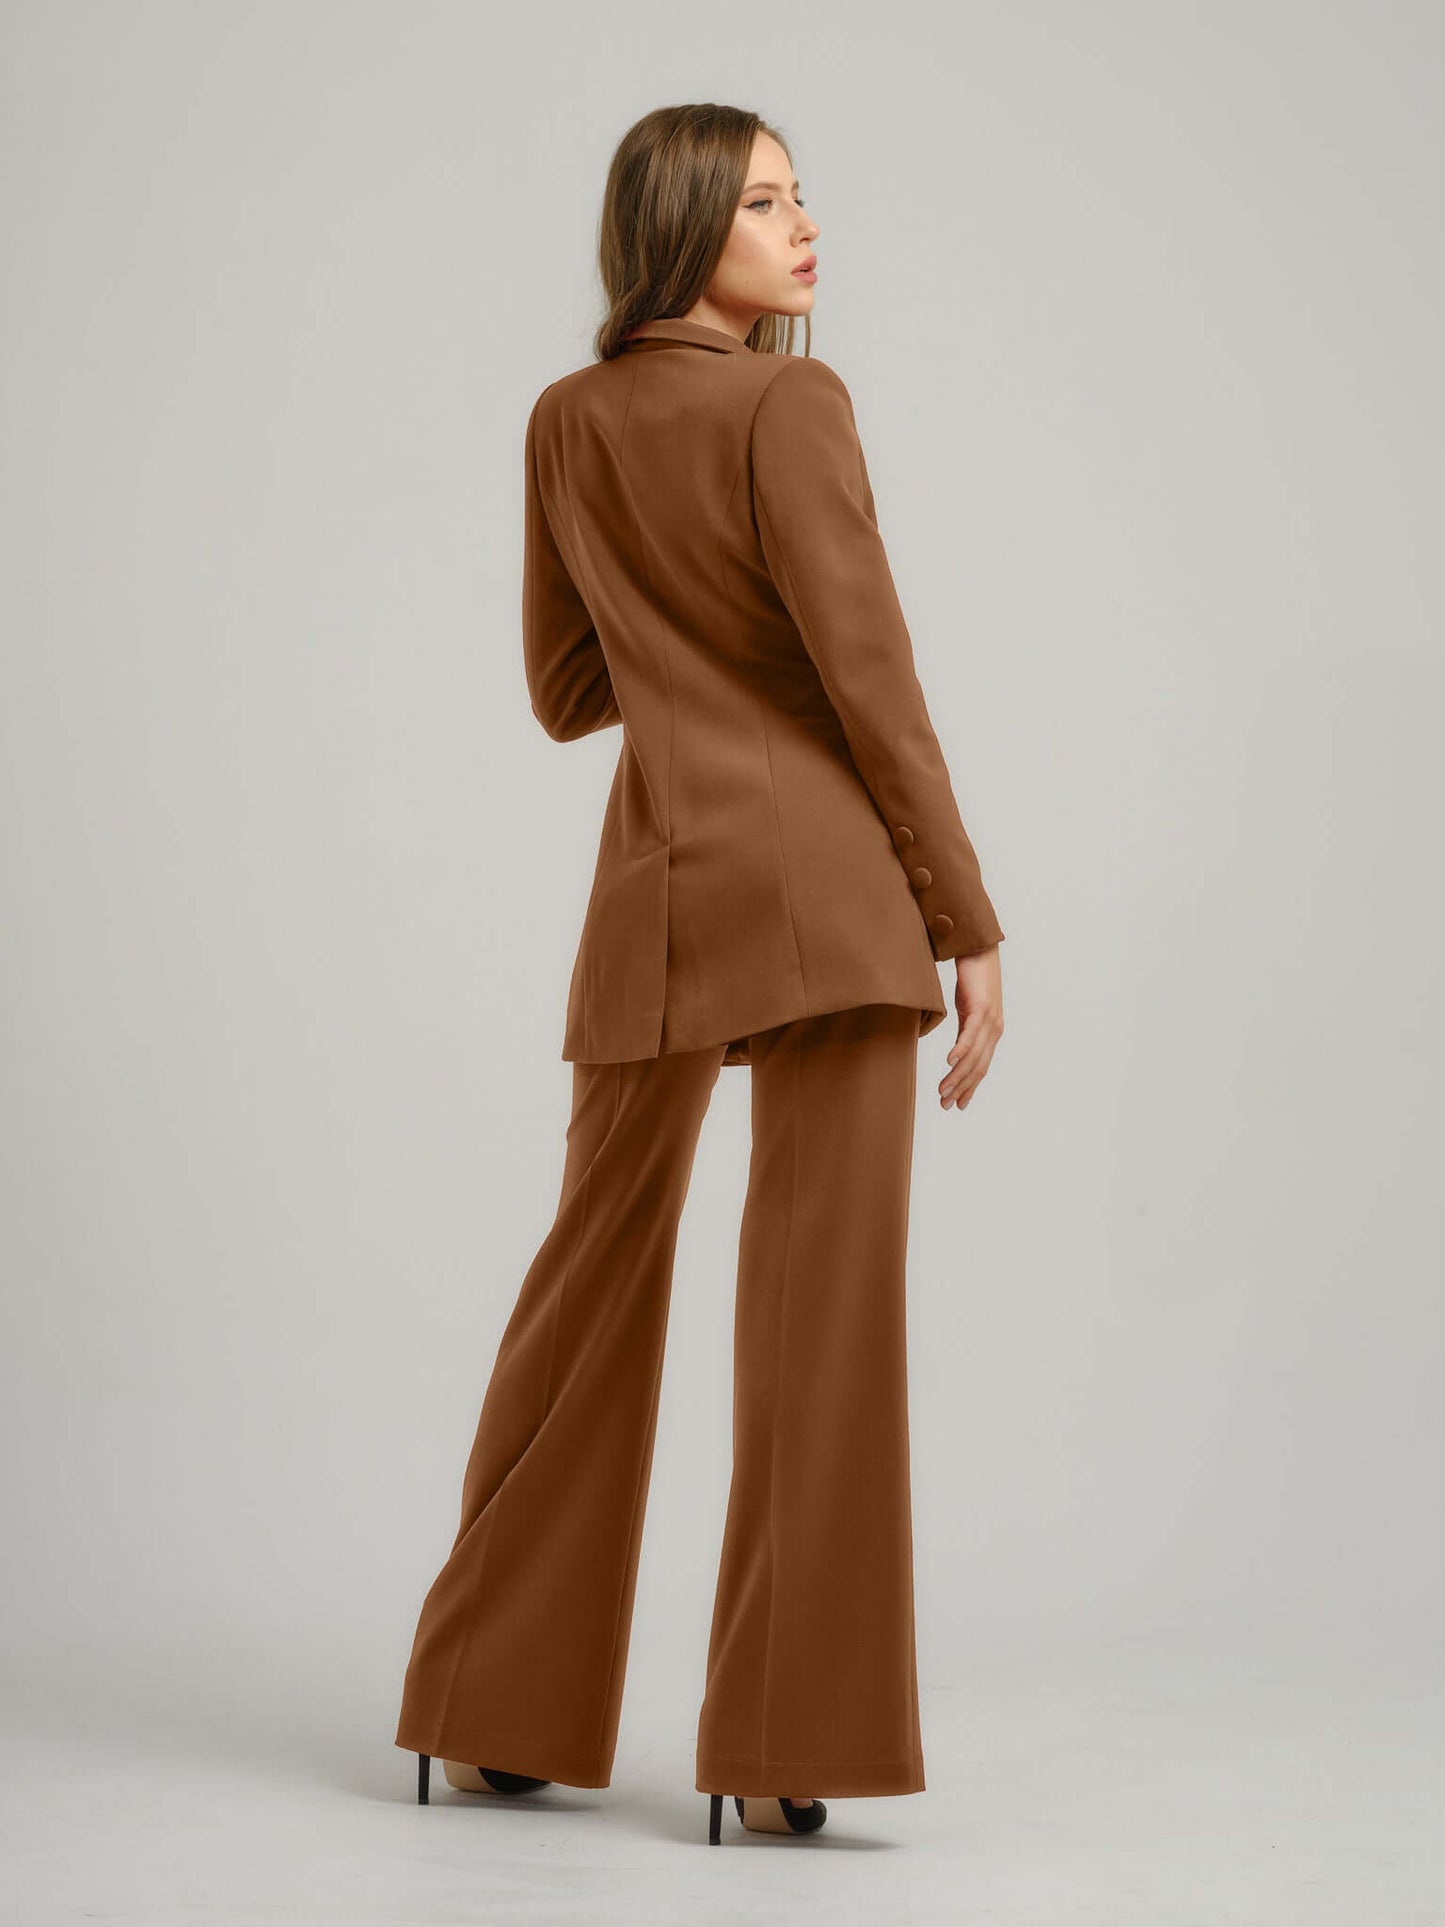 Tia Dorraine Warm Wishes Timeless Classic Blazer The thigh-length blazer is one of our favourite pieces. This statement piece features a single large button closure that emphasizes its streamlined design. It stands out with its structured shoulders, beaut